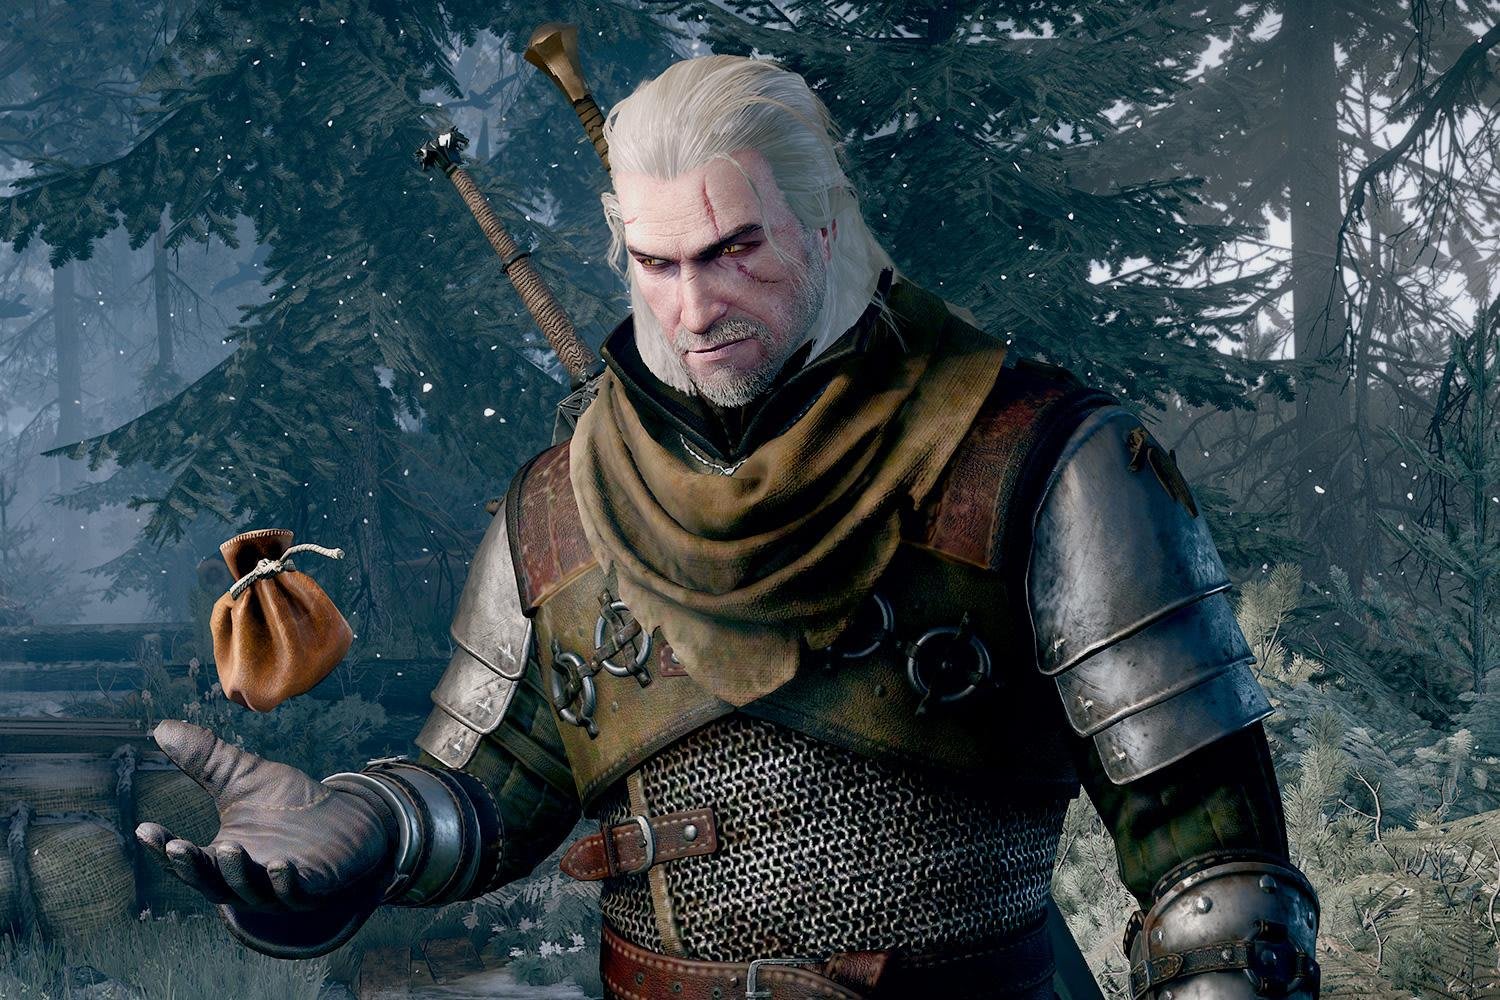 video game lawsuits - The Witcher Author vs. Game Developers